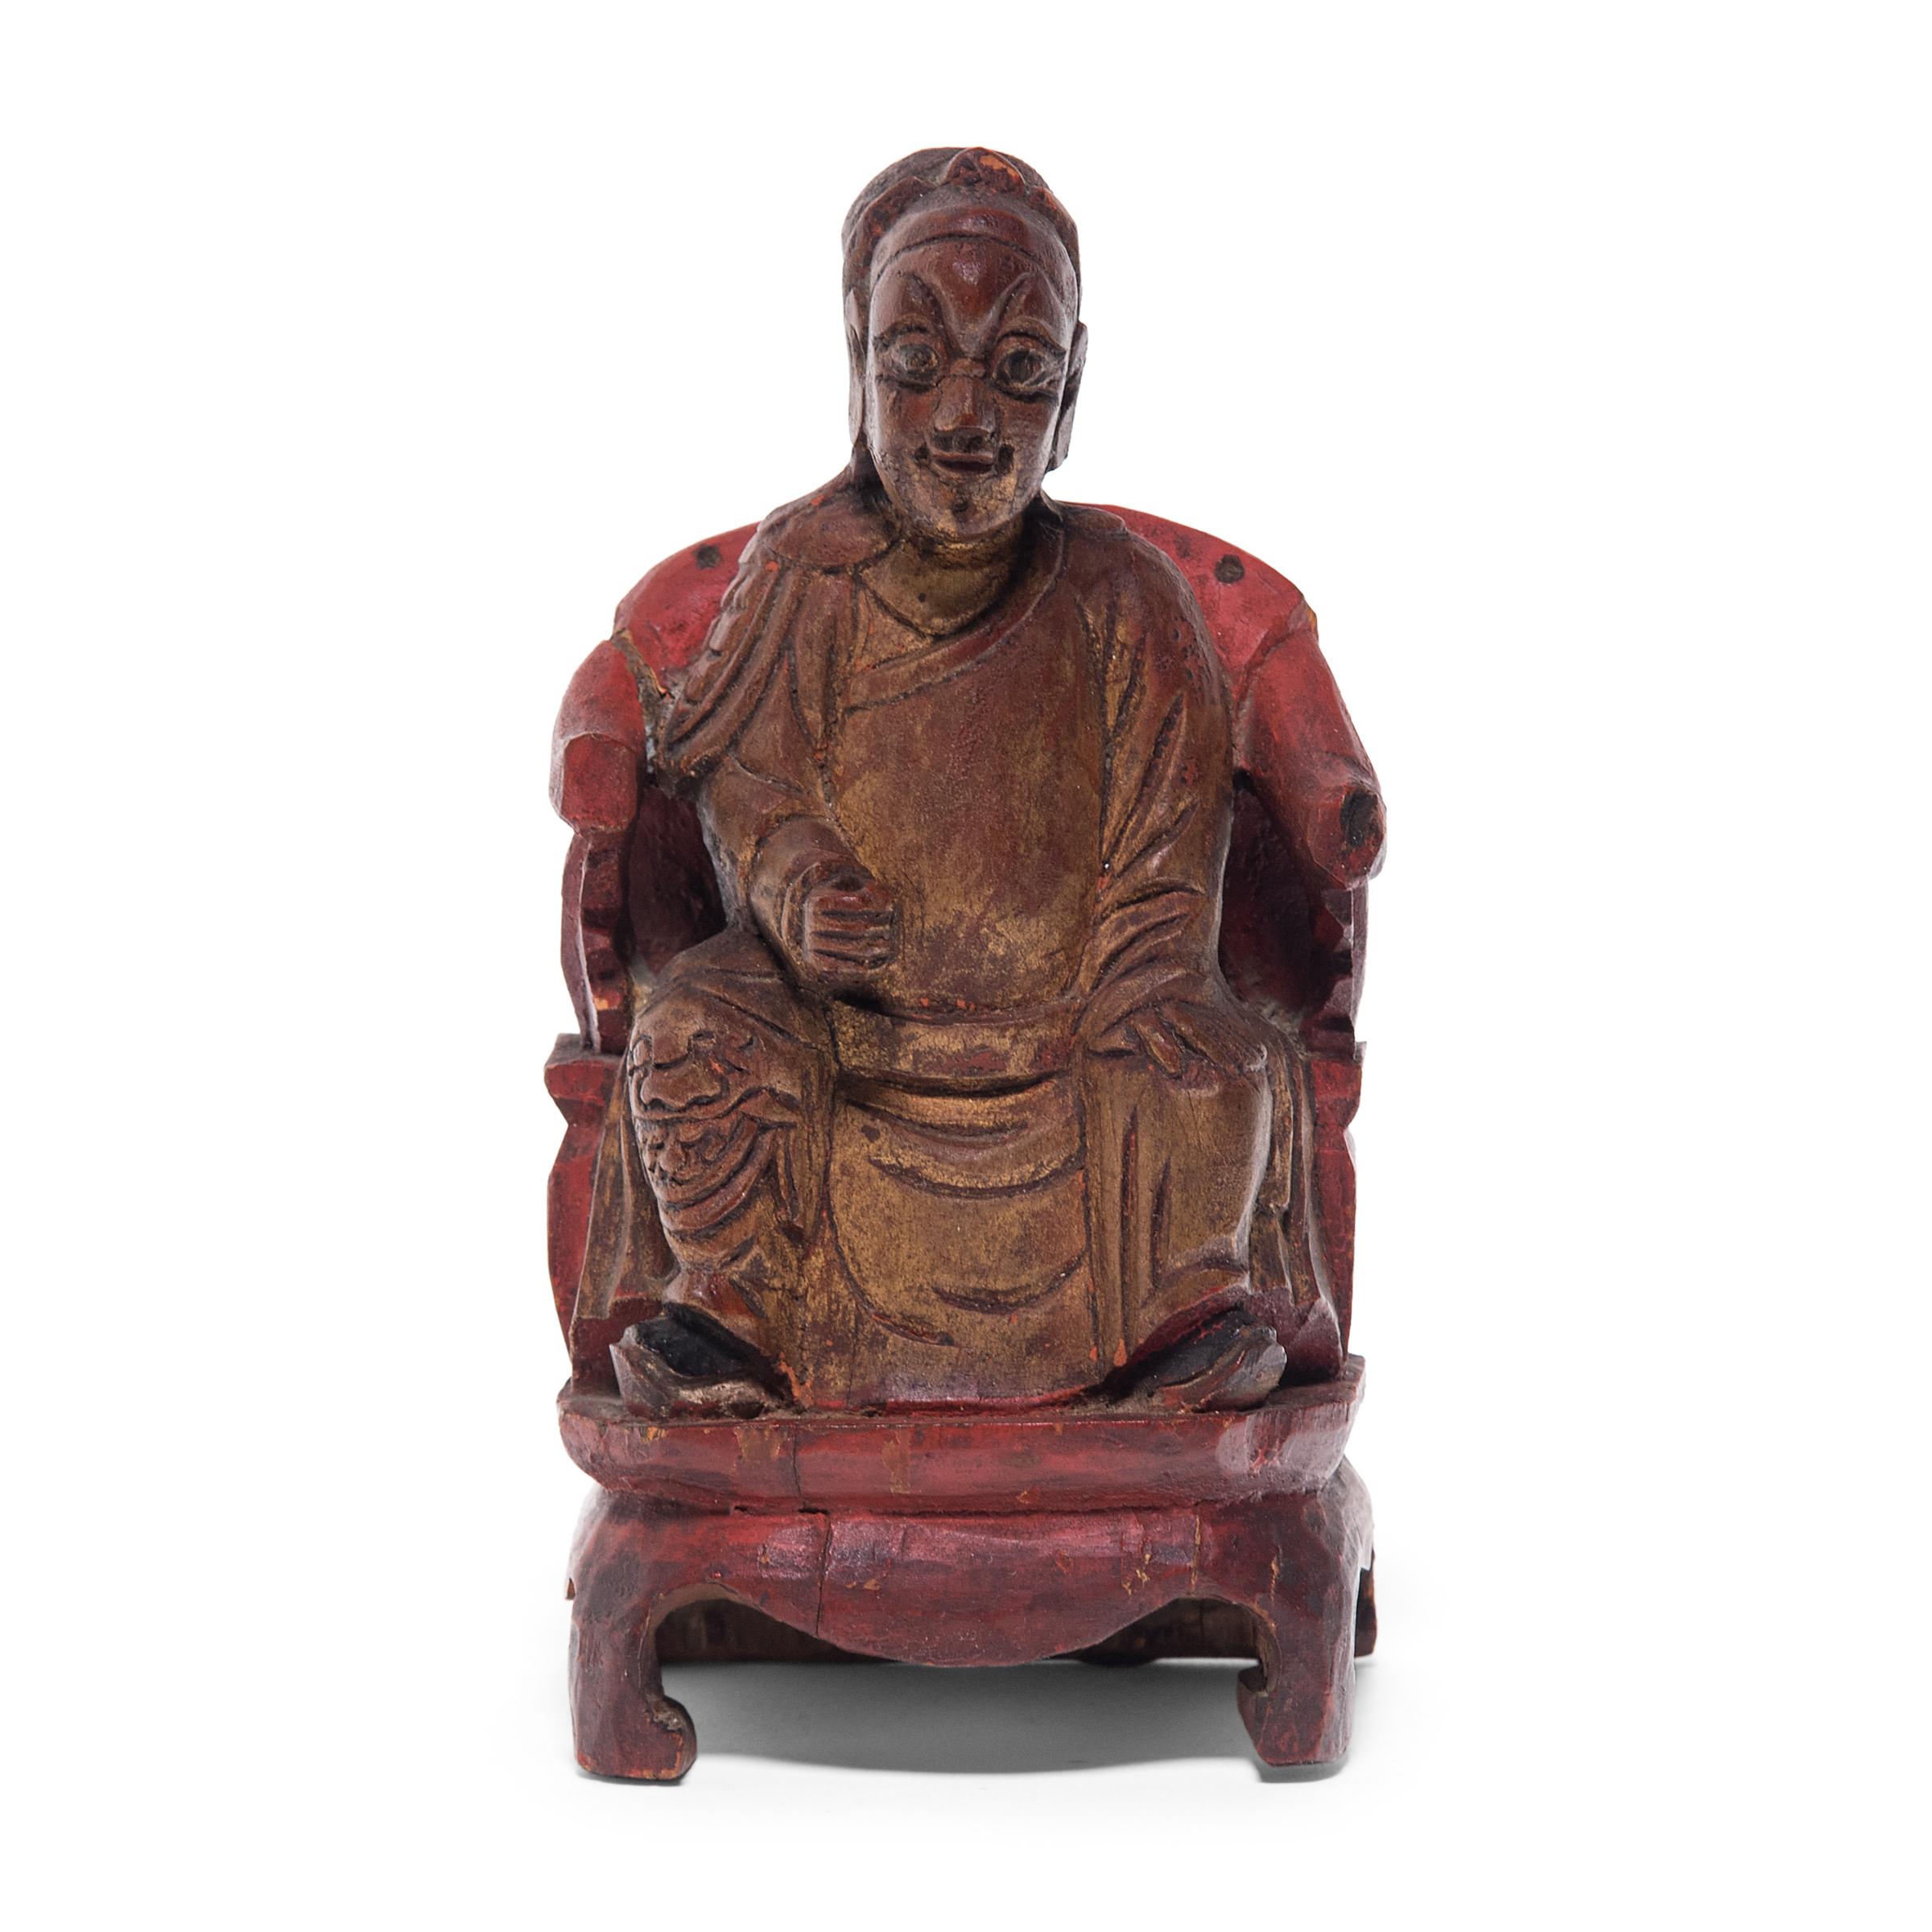 An integral part of traditional Chinese home life, ancestor worship before a domestic altar often featured painted ancestral portraits or tabletop ancestor figures. Seated upon a red roundback chair, this wooden ancestor figure bears the likeness of